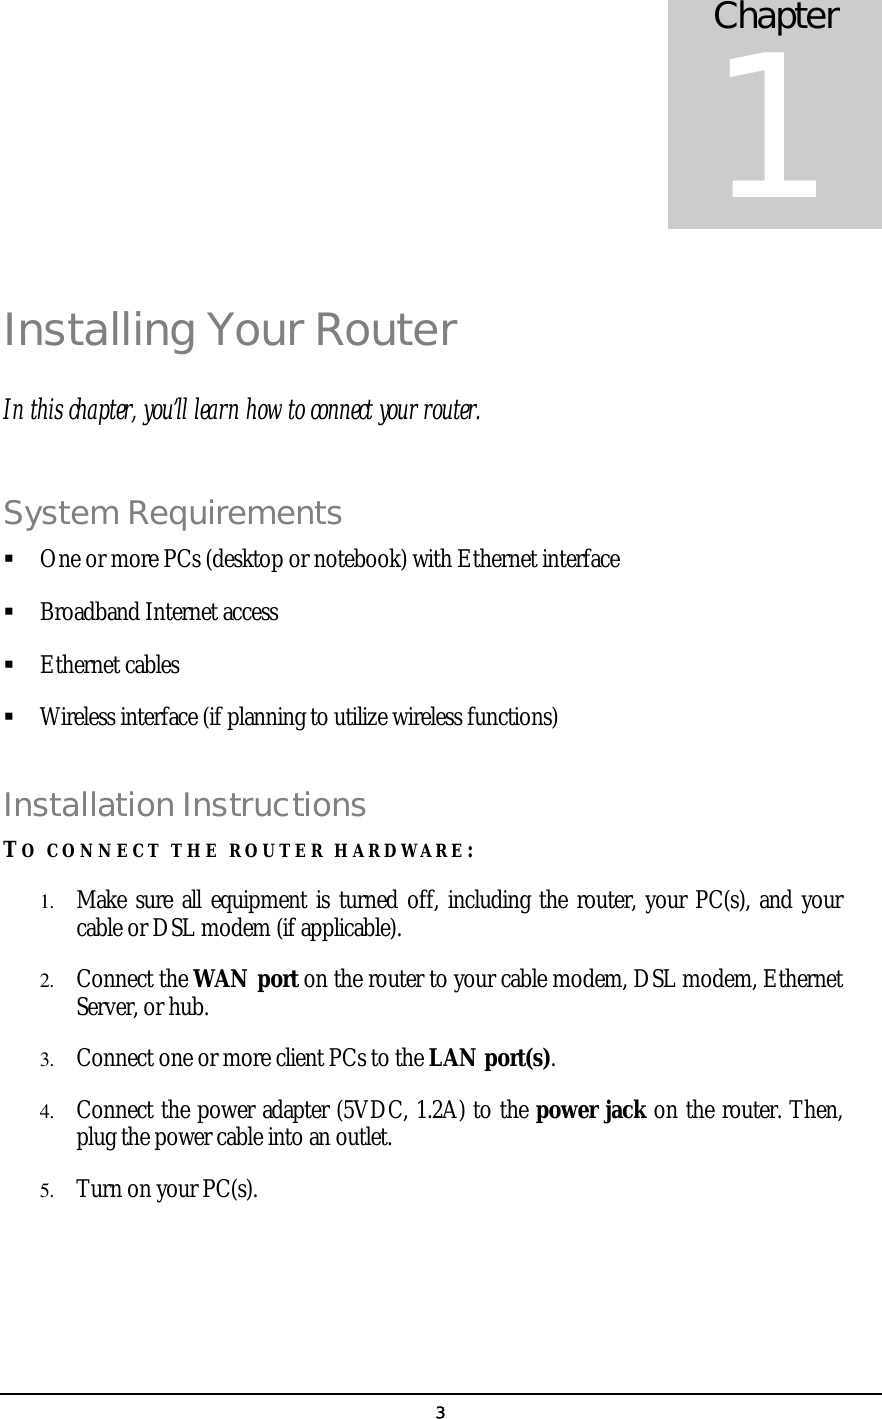   3Installing Your Router In this chapter, you’ll learn how to connect your router. System Requirements   One or more PCs (desktop or notebook) with Ethernet interface   Broadband Internet access   Ethernet cables   Wireless interface (if planning to utilize wireless functions) Installation Instructions TO CONNECT THE ROUTER HARDWARE: 1.  Make sure all equipment is turned off, including the router, your PC(s), and your cable or DSL modem (if applicable). 2.  Connect the WAN port on the router to your cable modem, DSL modem, Ethernet Server, or hub. 3.  Connect one or more client PCs to the LAN port(s). 4.  Connect the power adapter (5VDC, 1.2A) to the power jack on the router. Then, plug the power cable into an outlet. 5.  Turn on your PC(s).   Chapter 1 